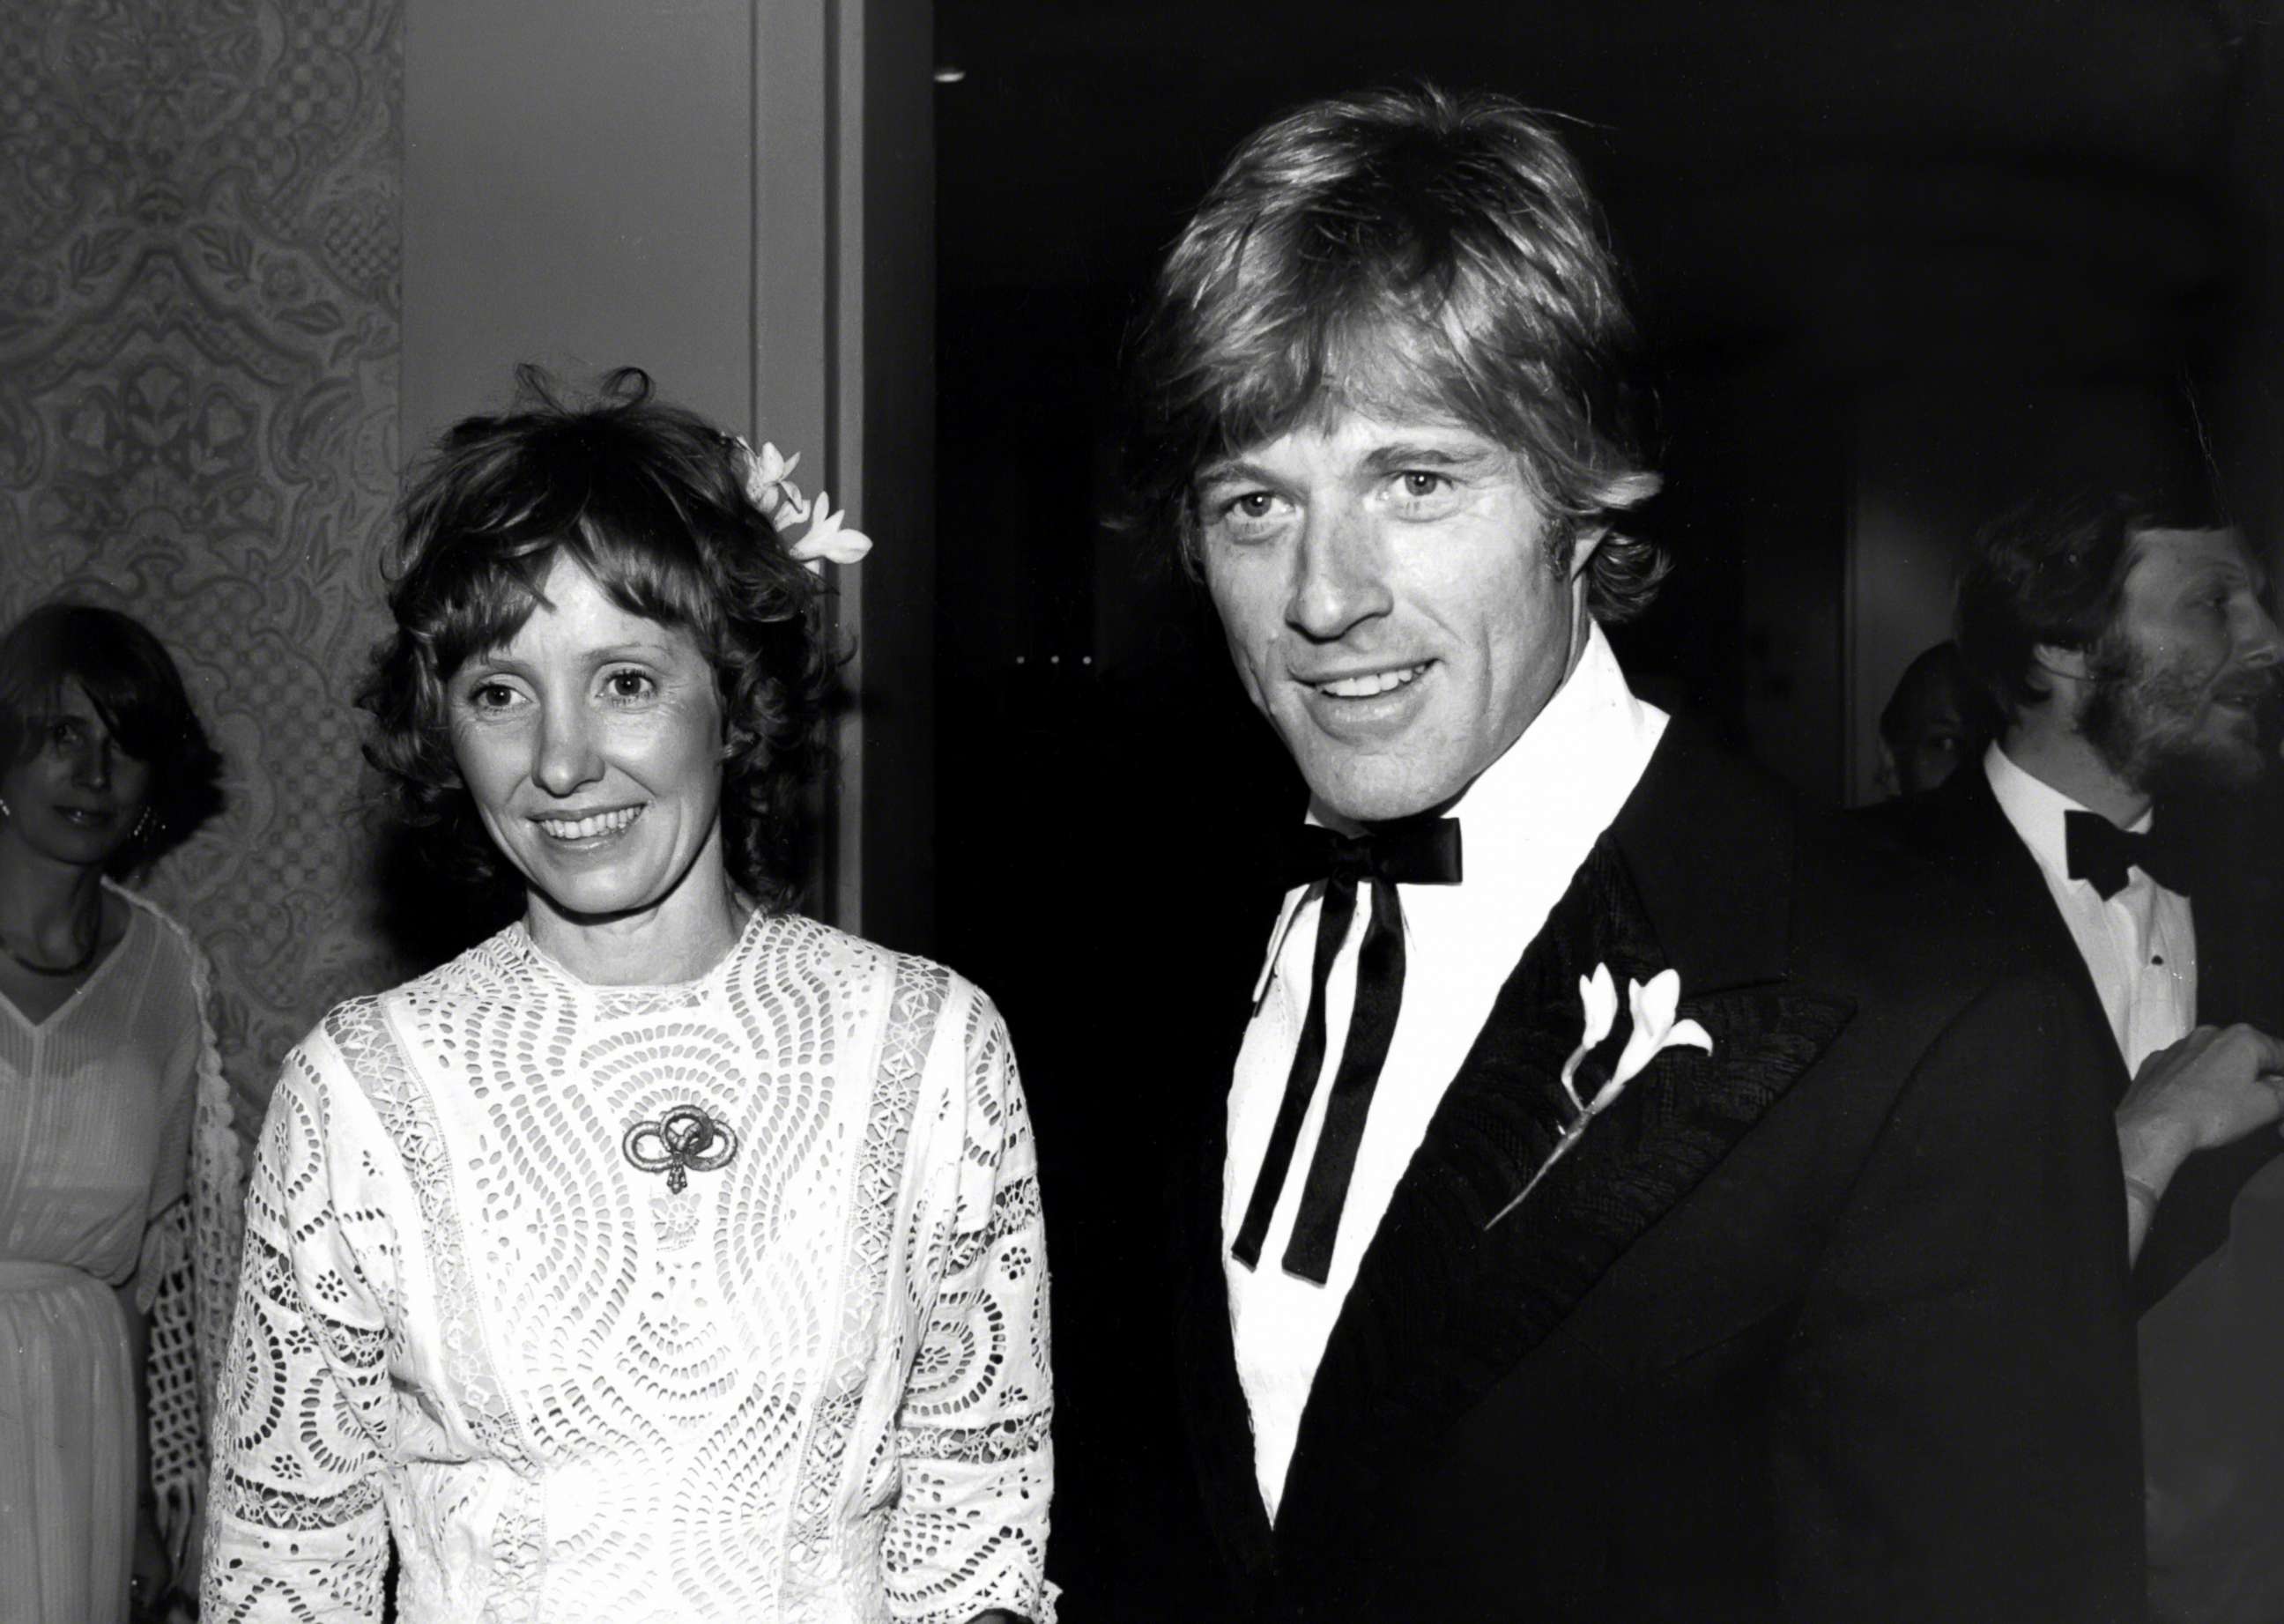 Robert Redford First Wife - NAKPIC.STORE